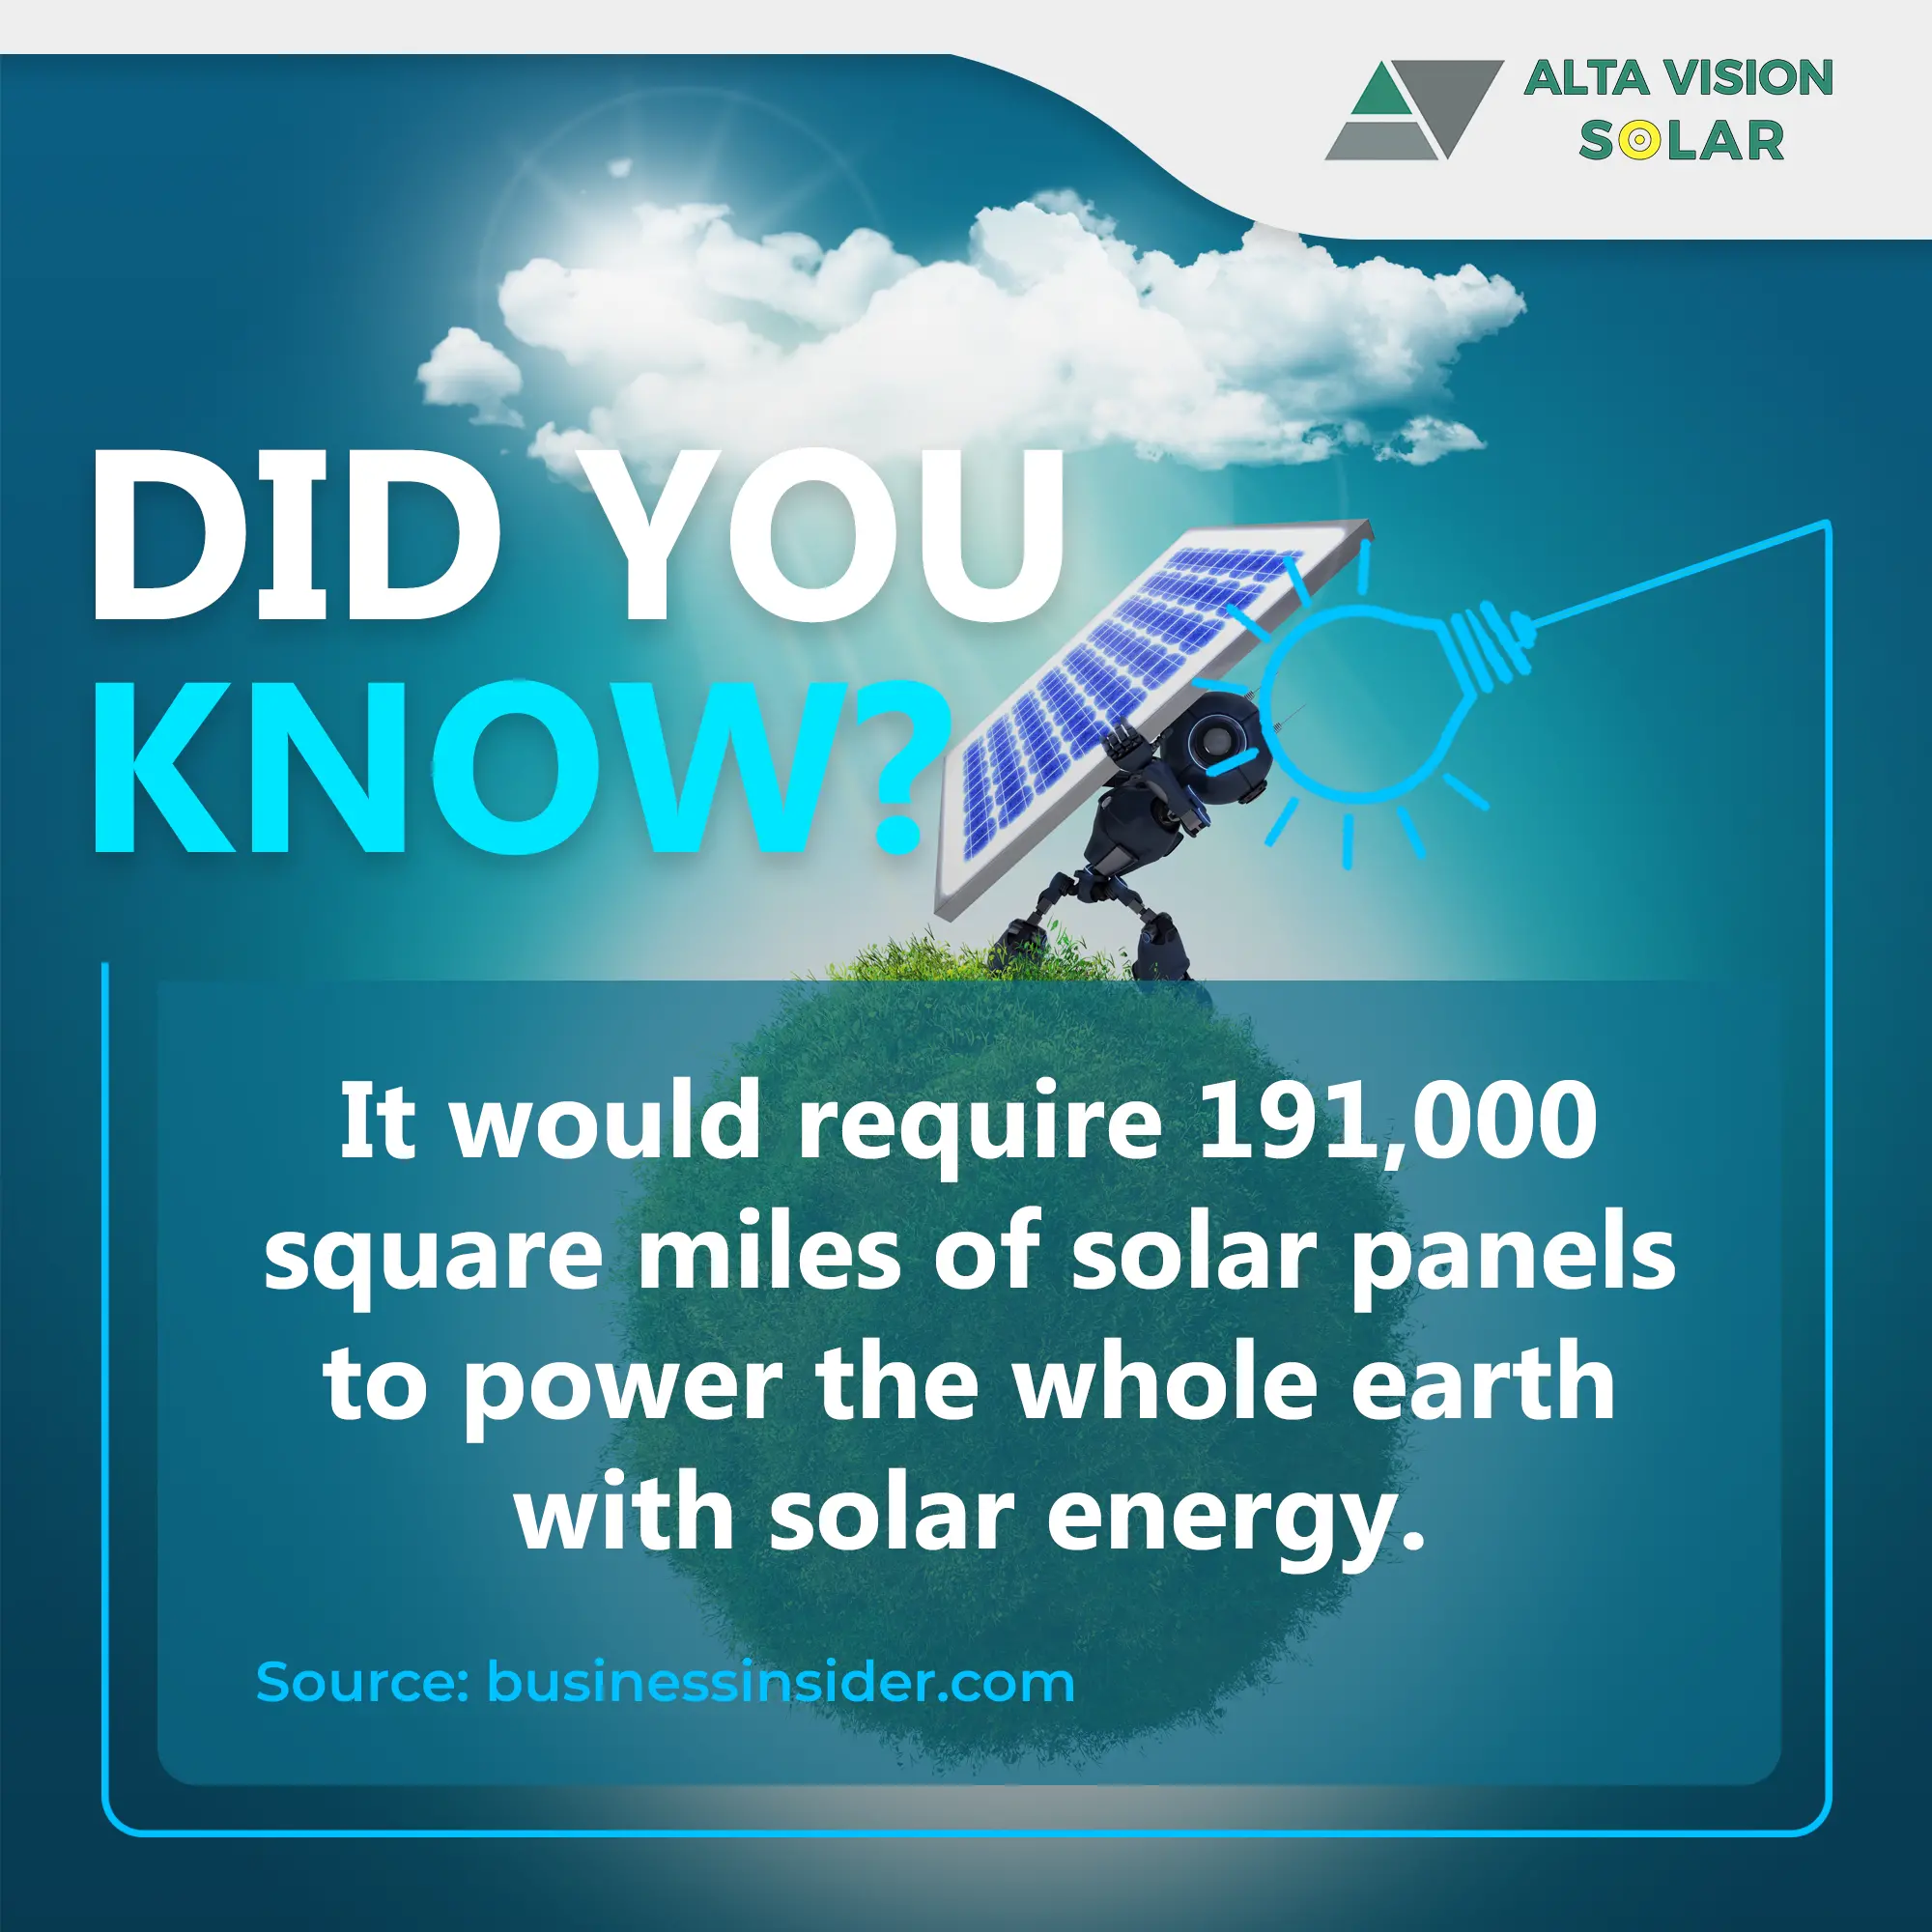 It would require 191,000 square miles of solar panels to power the whole earth with solar energy